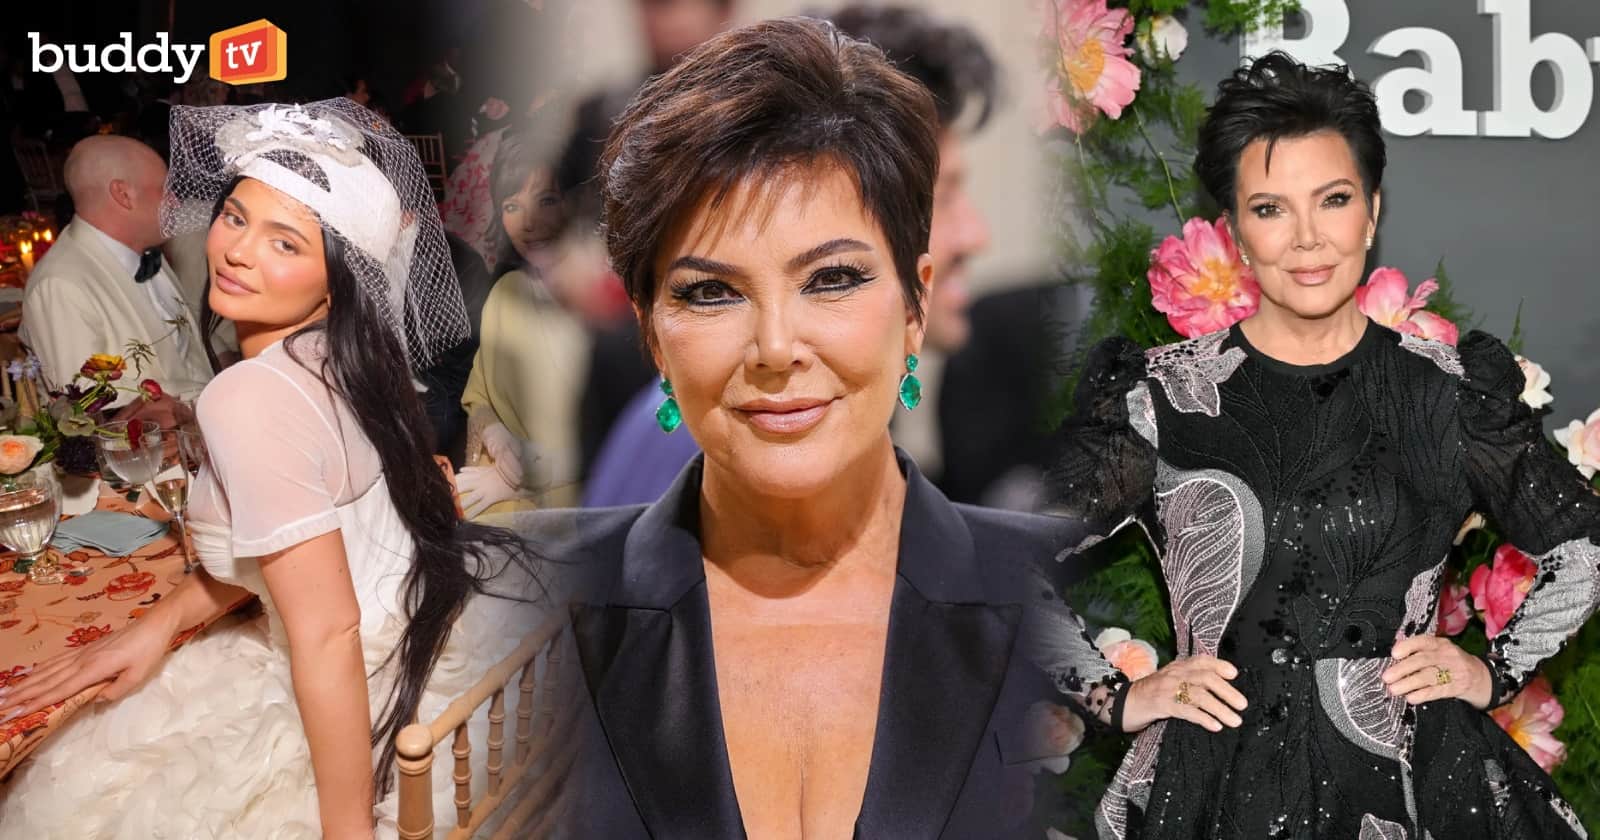 Kris Jenner Confesses Guilt for Family’s Fame: ‘Can Be A Curse’